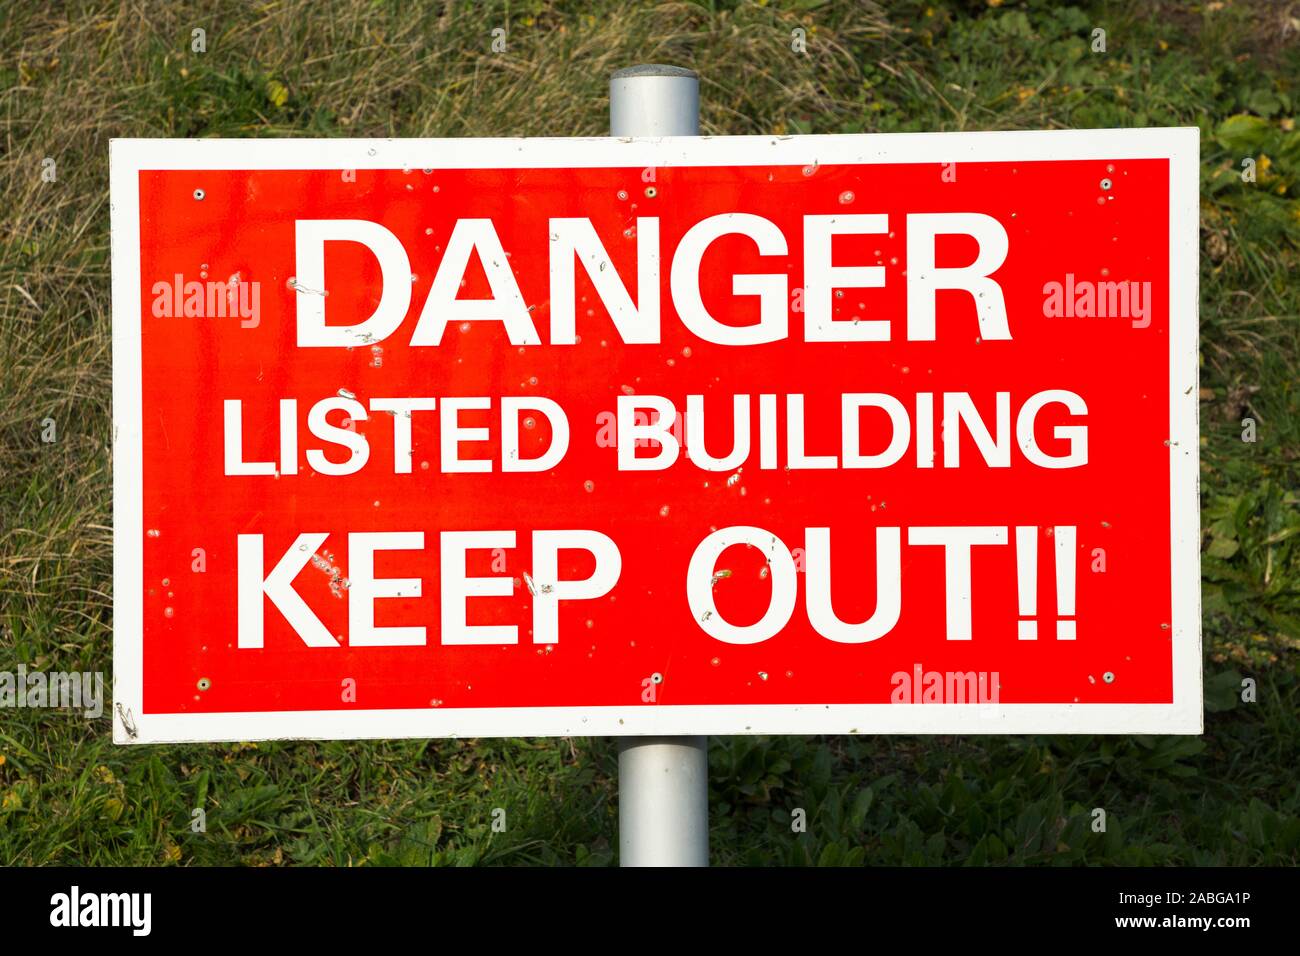 Listed building keep out sign, and danger signs at a former MOD / Ministry of Defence army or navy / naval site. UK (105) Stock Photo